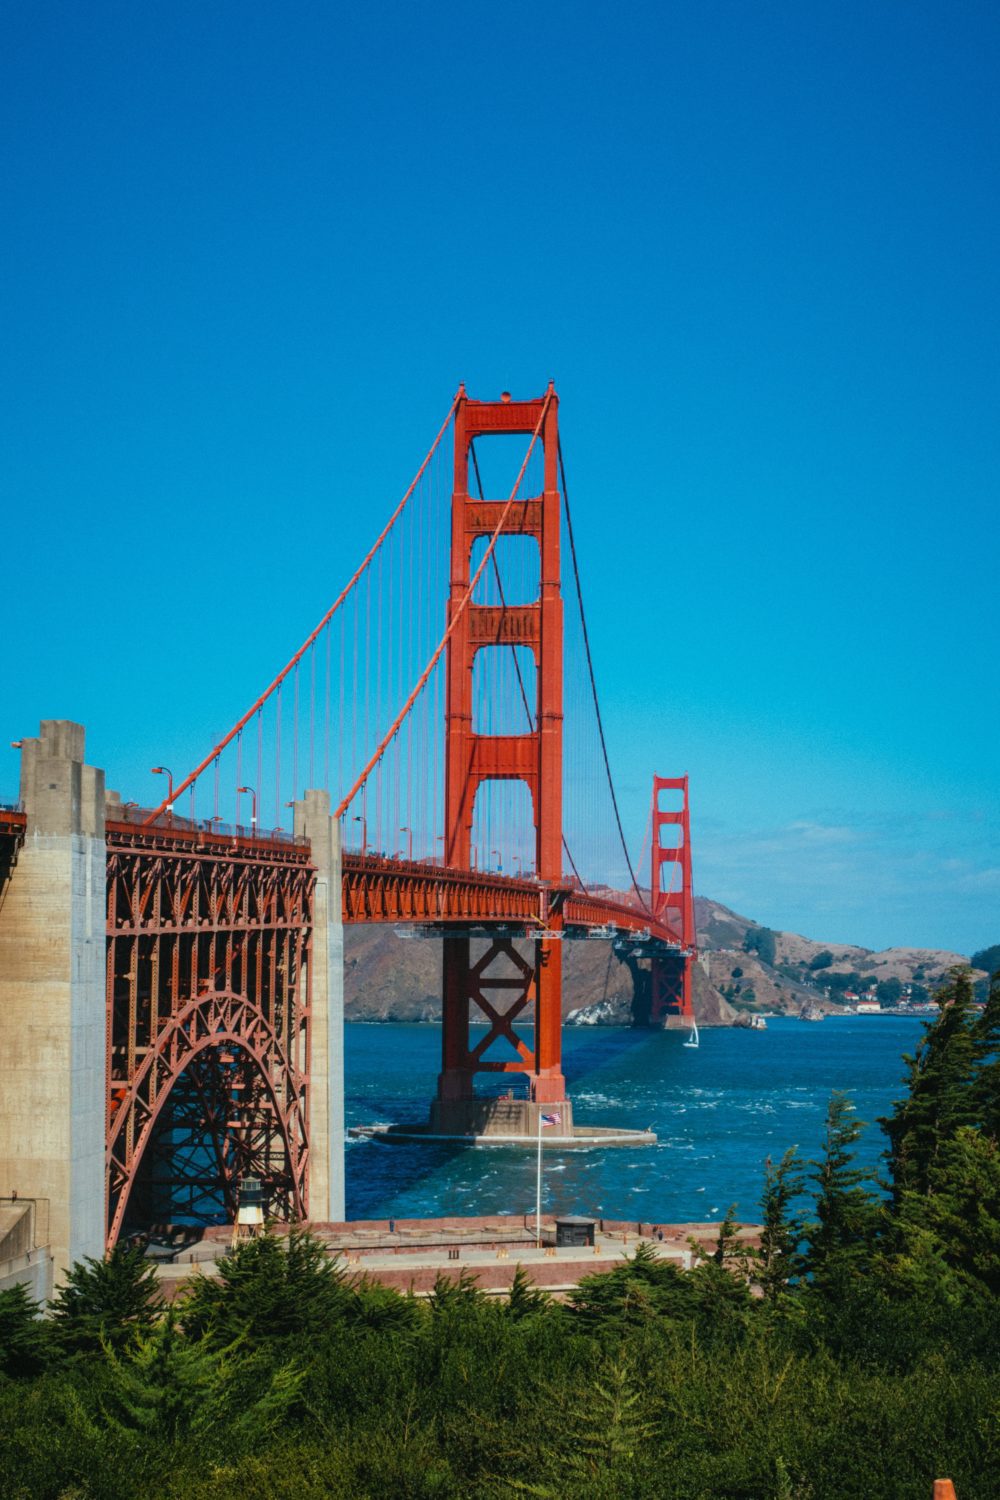 The Golden Gate Bridge in San Francisco on a sunny day.